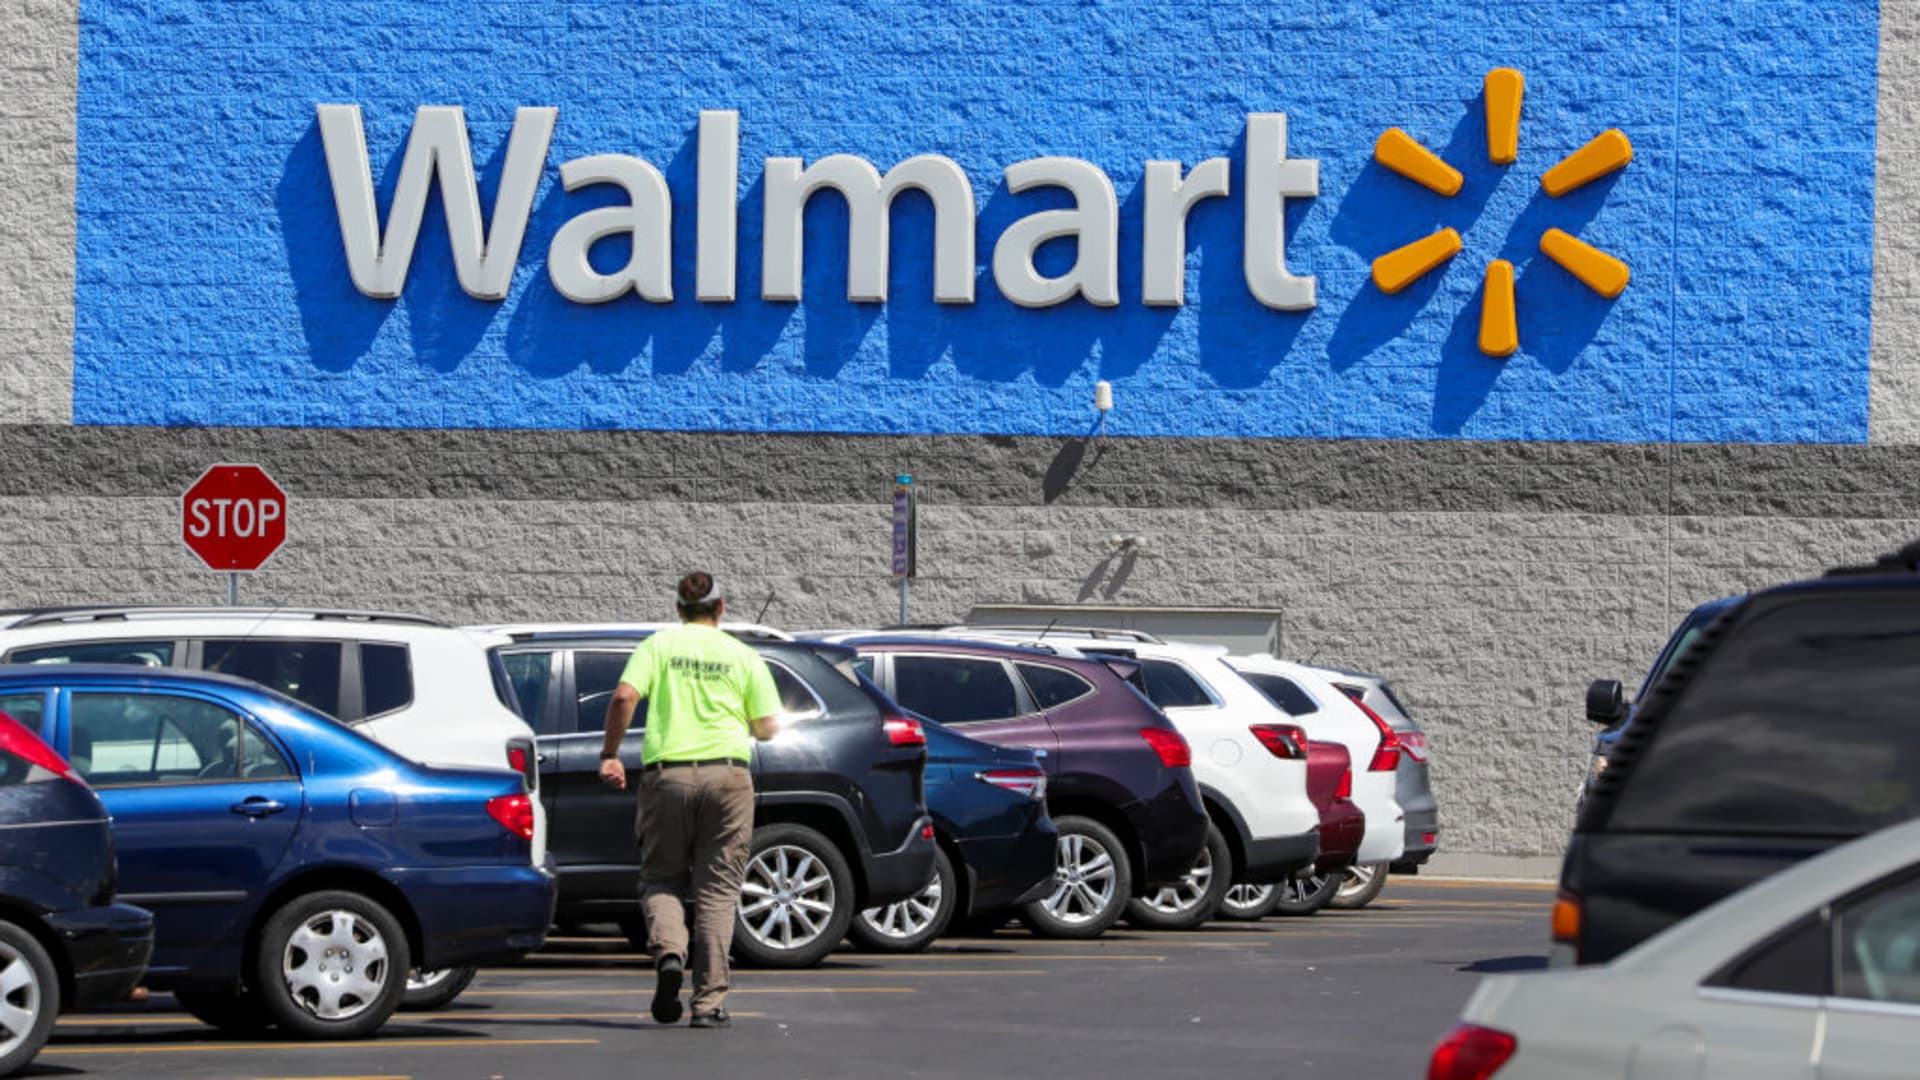 Walmart CEO says shoplifting could lead to price jumps, store closures